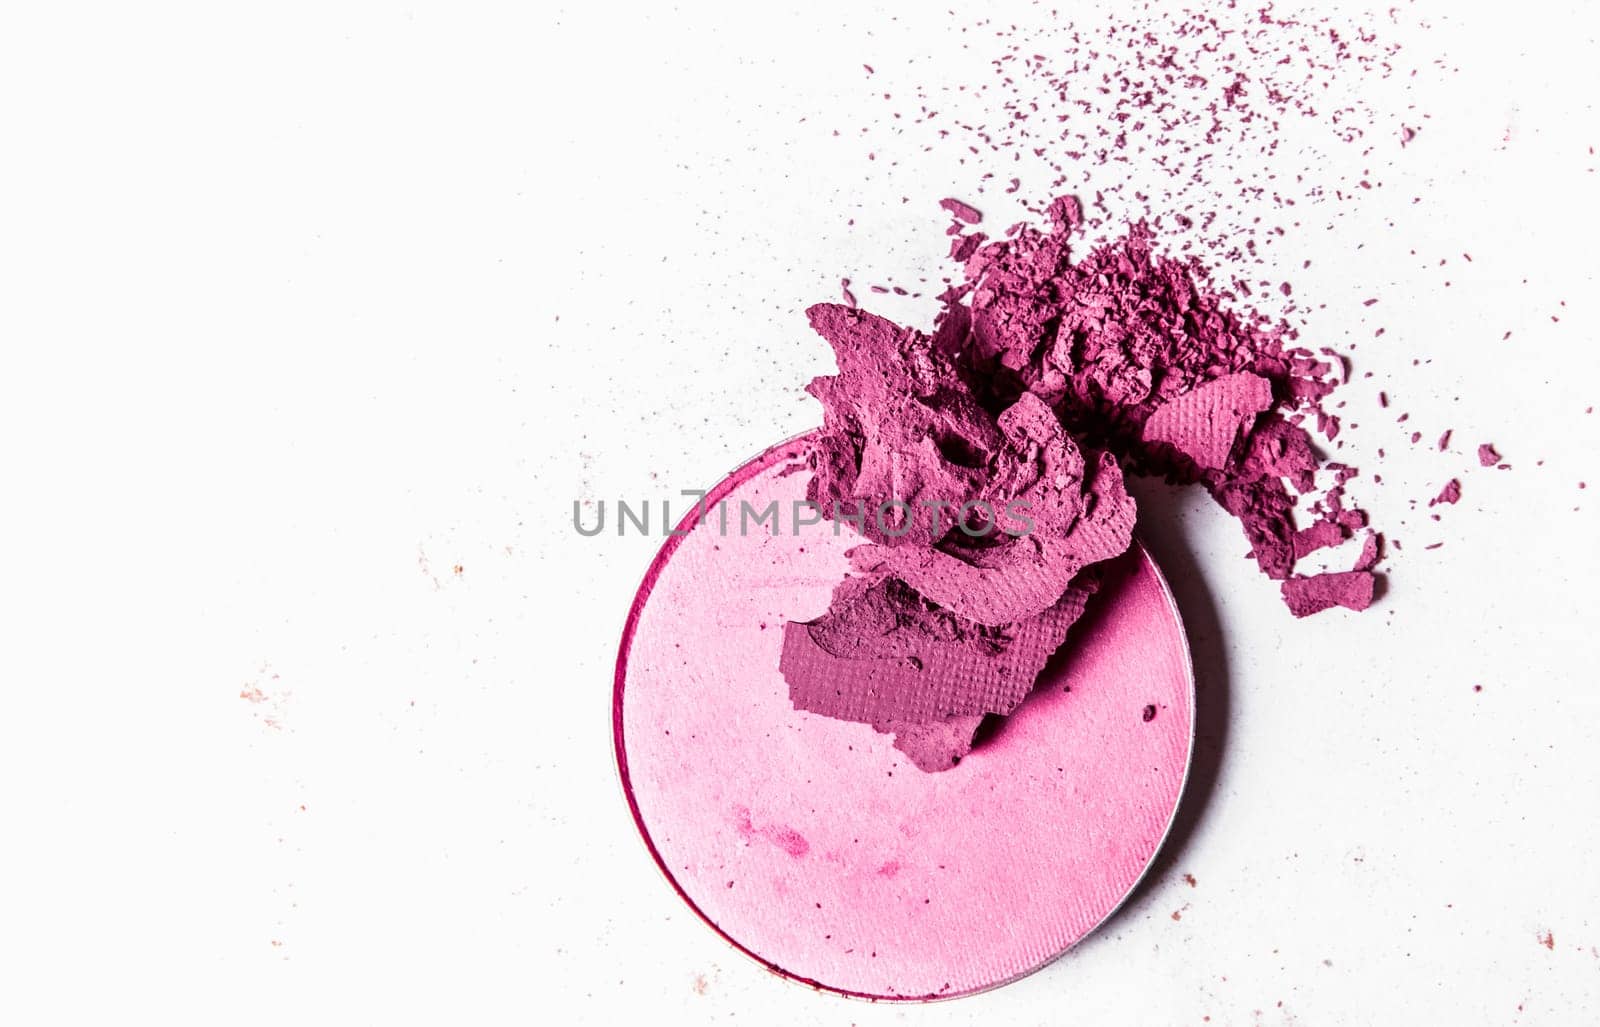 Crushed eyeshadow palette close-up isolated on white background by Anneleven